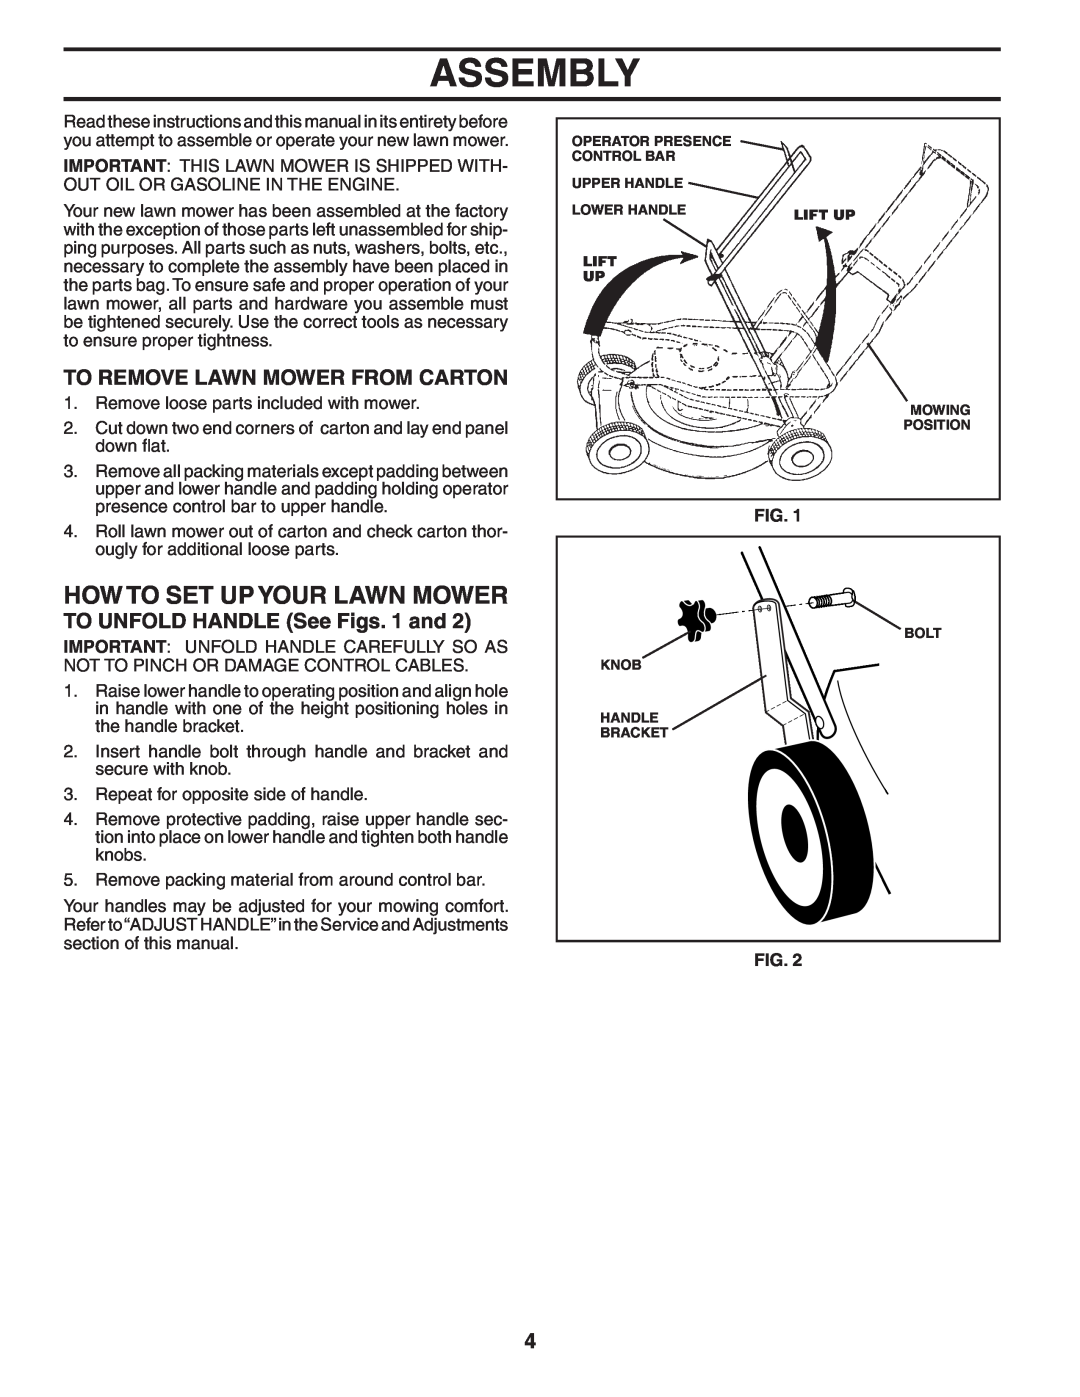 Husqvarna 55C21HV owner manual Assembly, How To Set Up Your Lawn Mower, To Remove Lawn Mower From Carton 